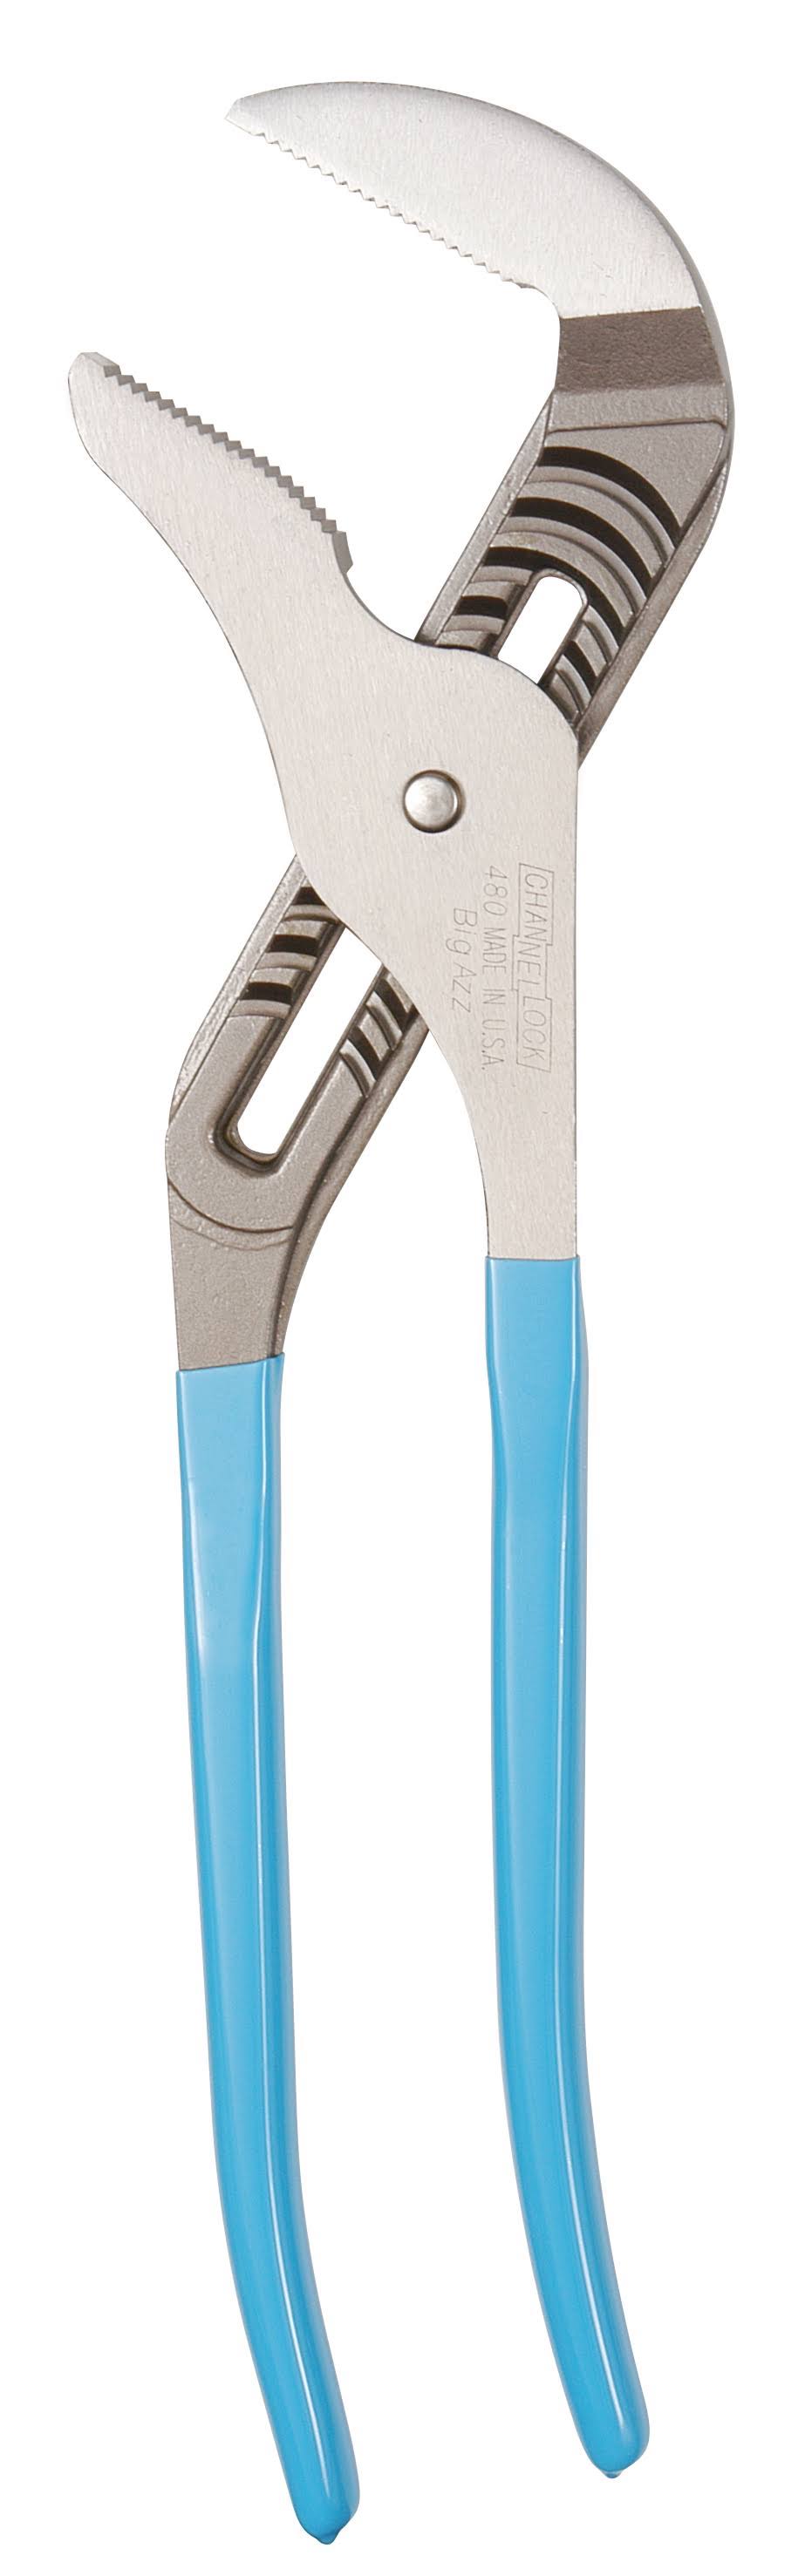 Channellock Tongue and Groove Plier - 20"